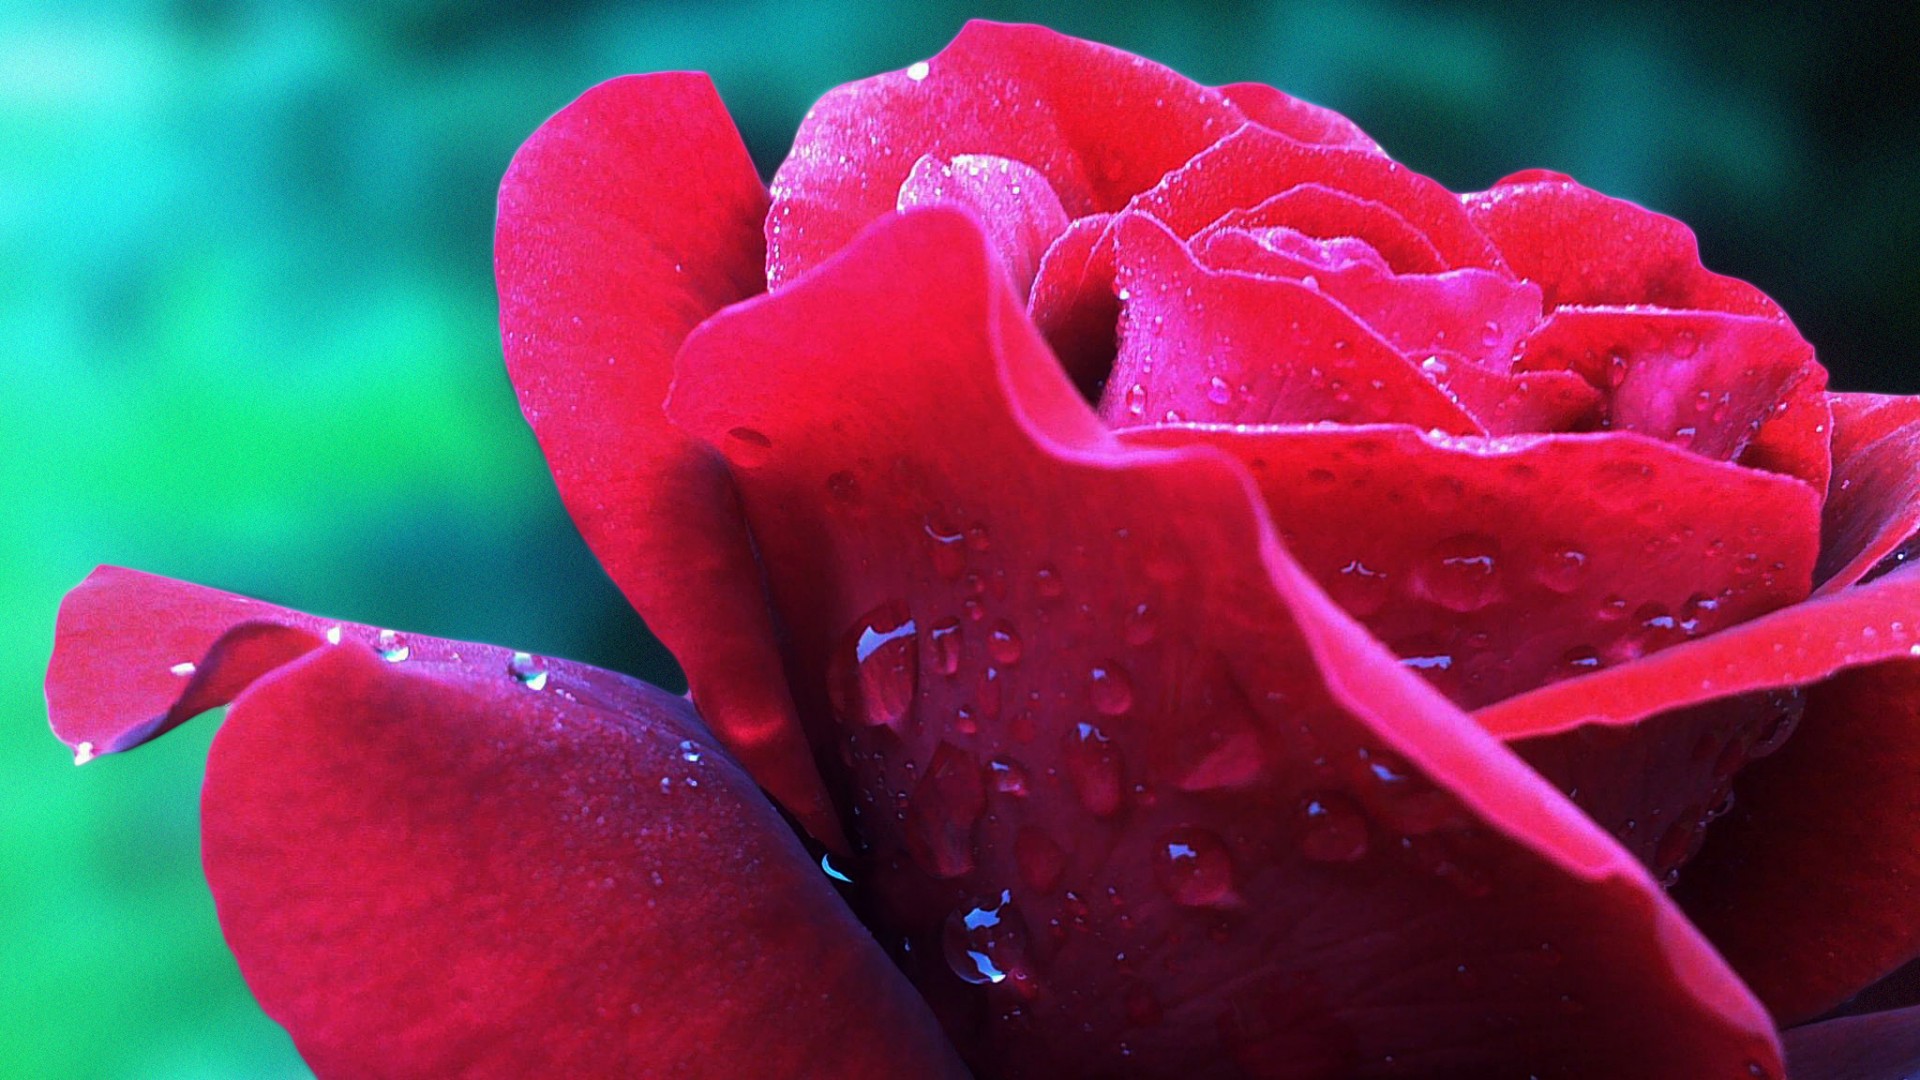 Rose Flower Hd Wallpapers 1080p For Mobile